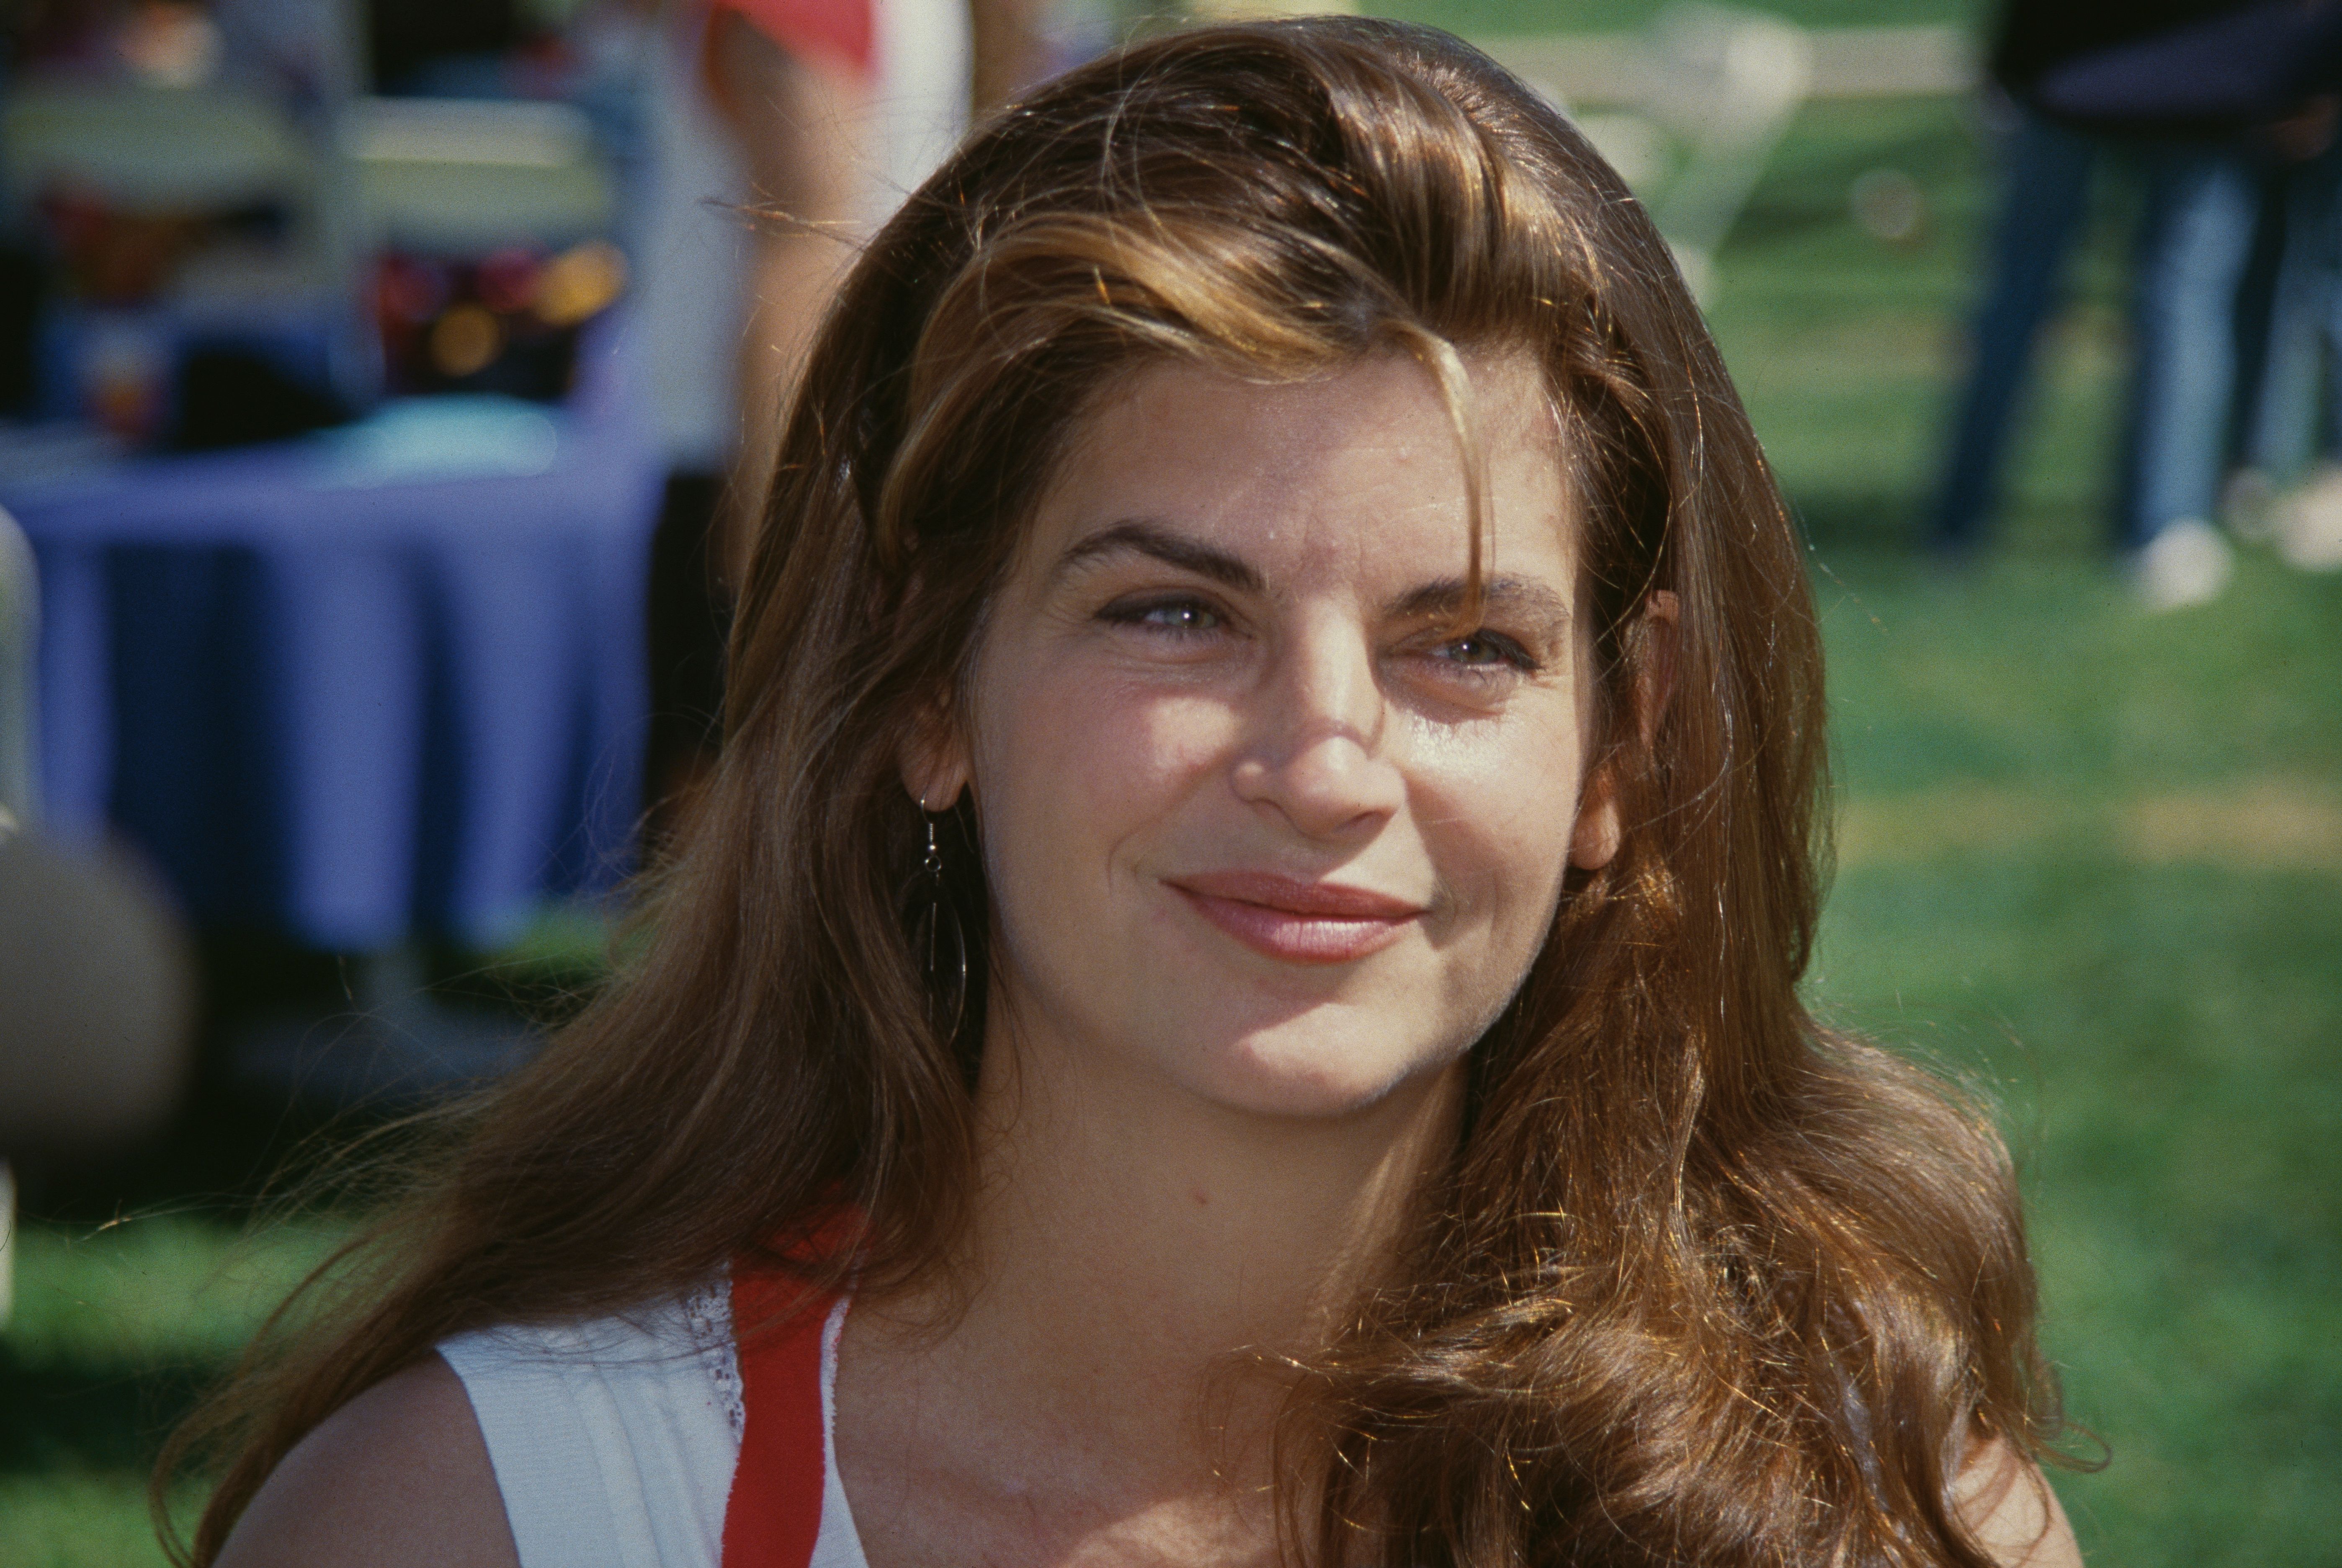 Kirstie Alley attends Narconon's 1991 Celebrity Softball Game, held at the Tom Bradley Stadium, in the grounds of Birmingham High School in Van Nuys, California, 28th September 1991 | Source: Getty Images 